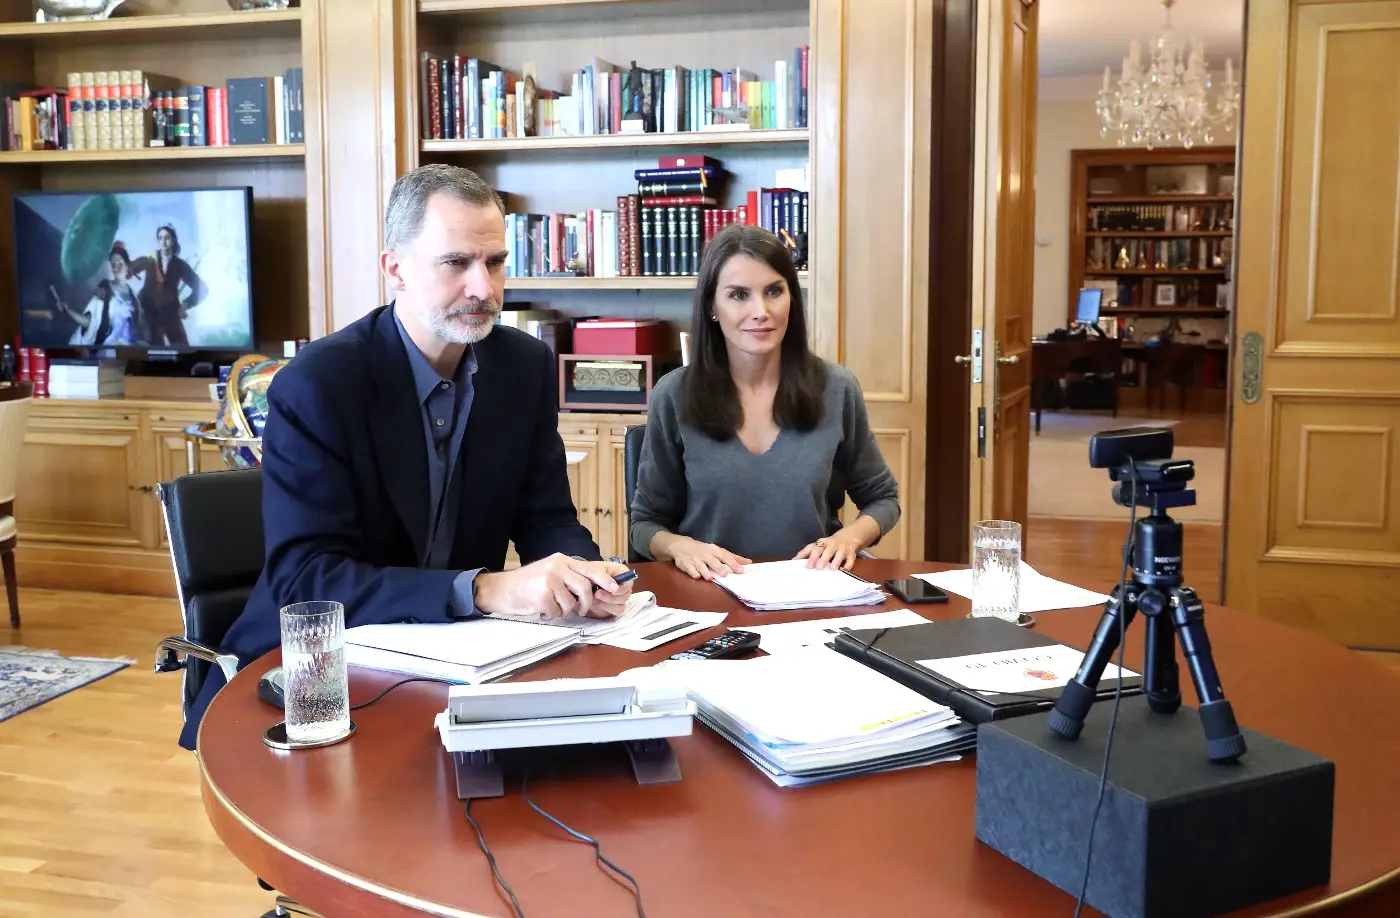 King Felipe and Queen Letizia talked to the Spanish Singers